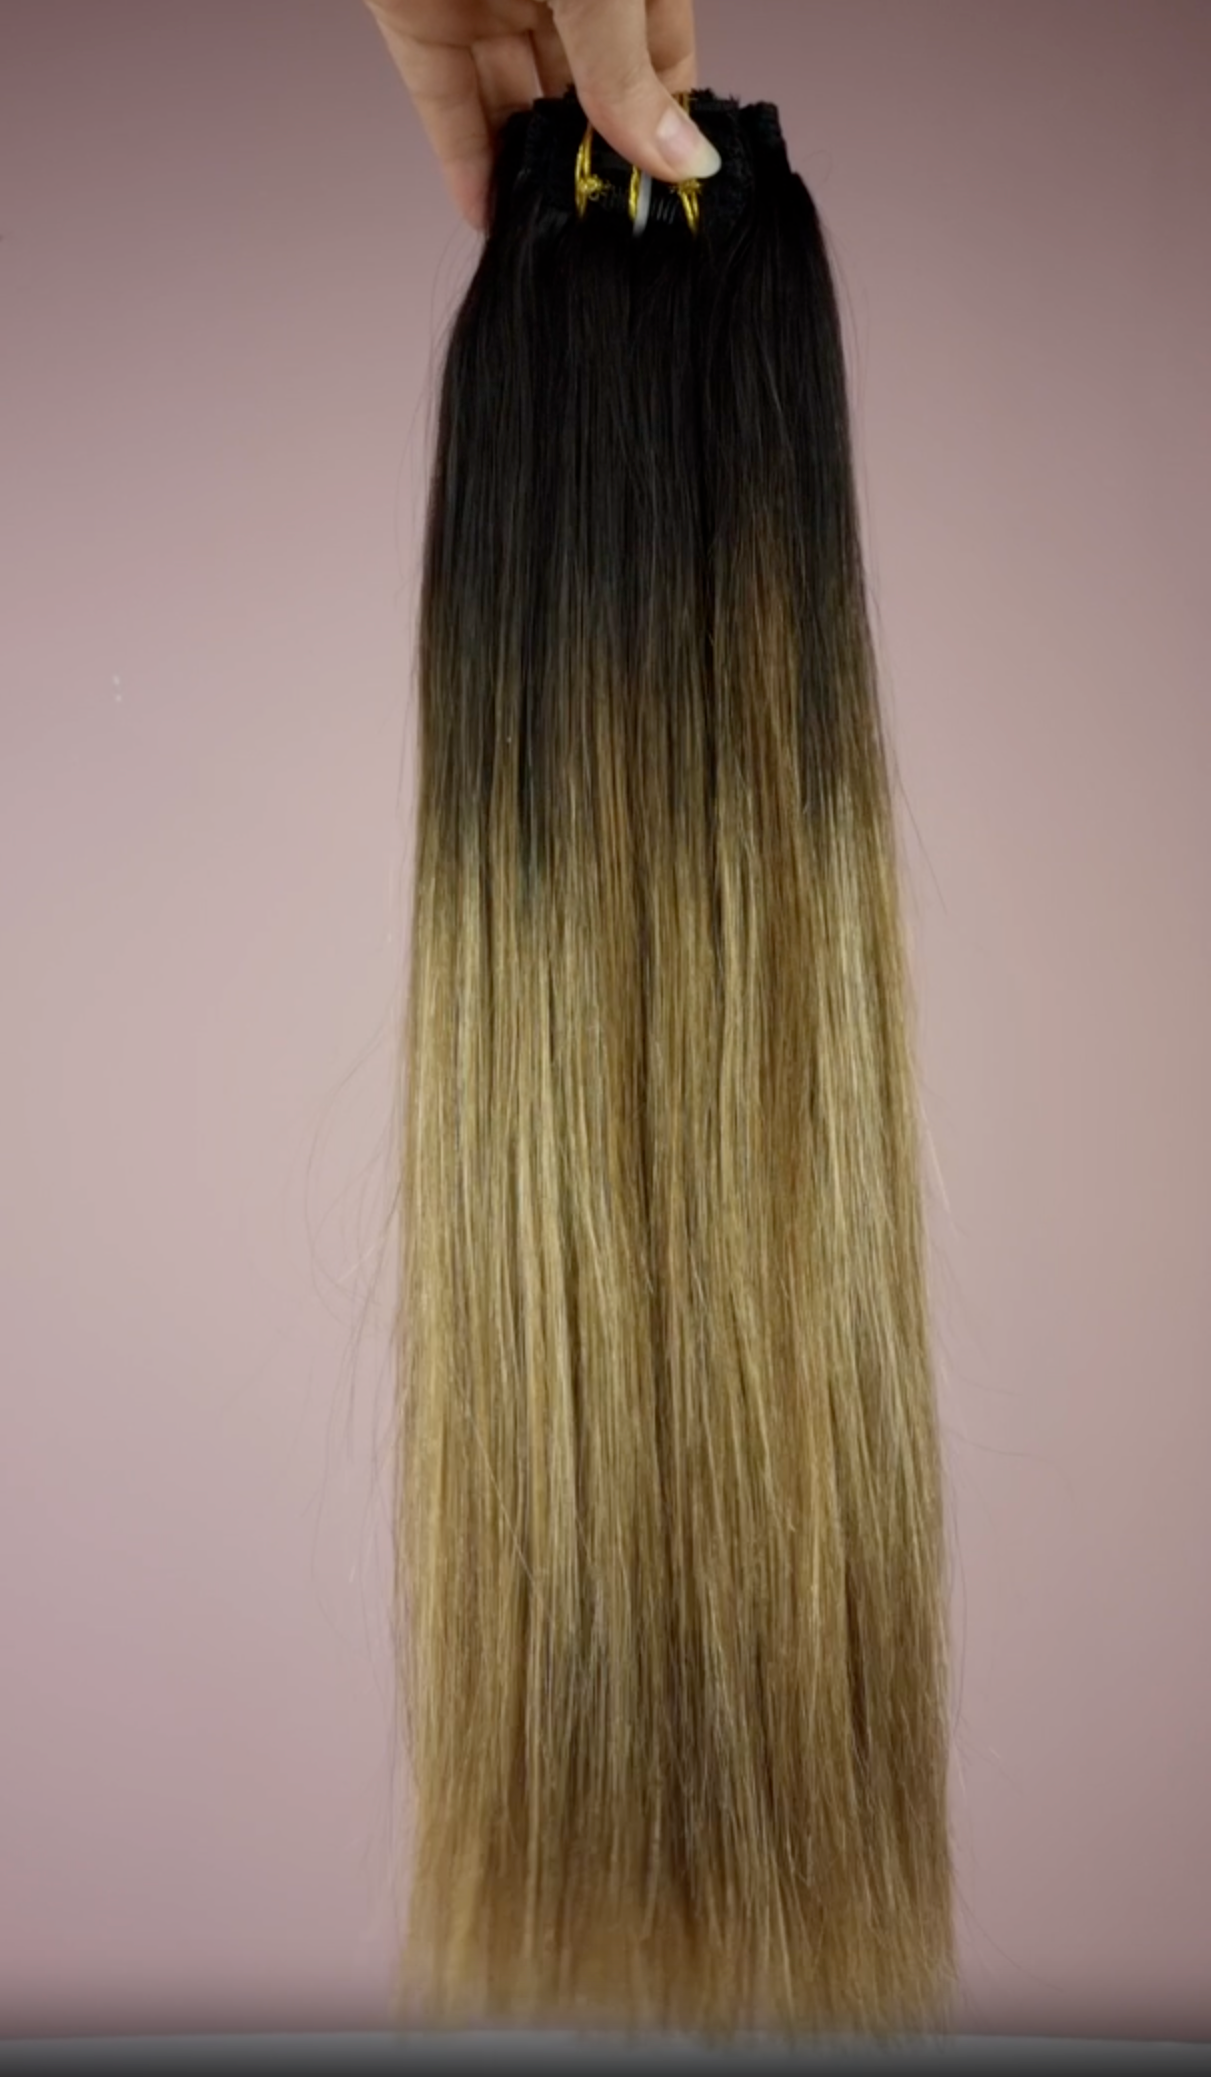 Mocha Bronde Balayage clip-in hairextensions ☕ 40cm - 260g